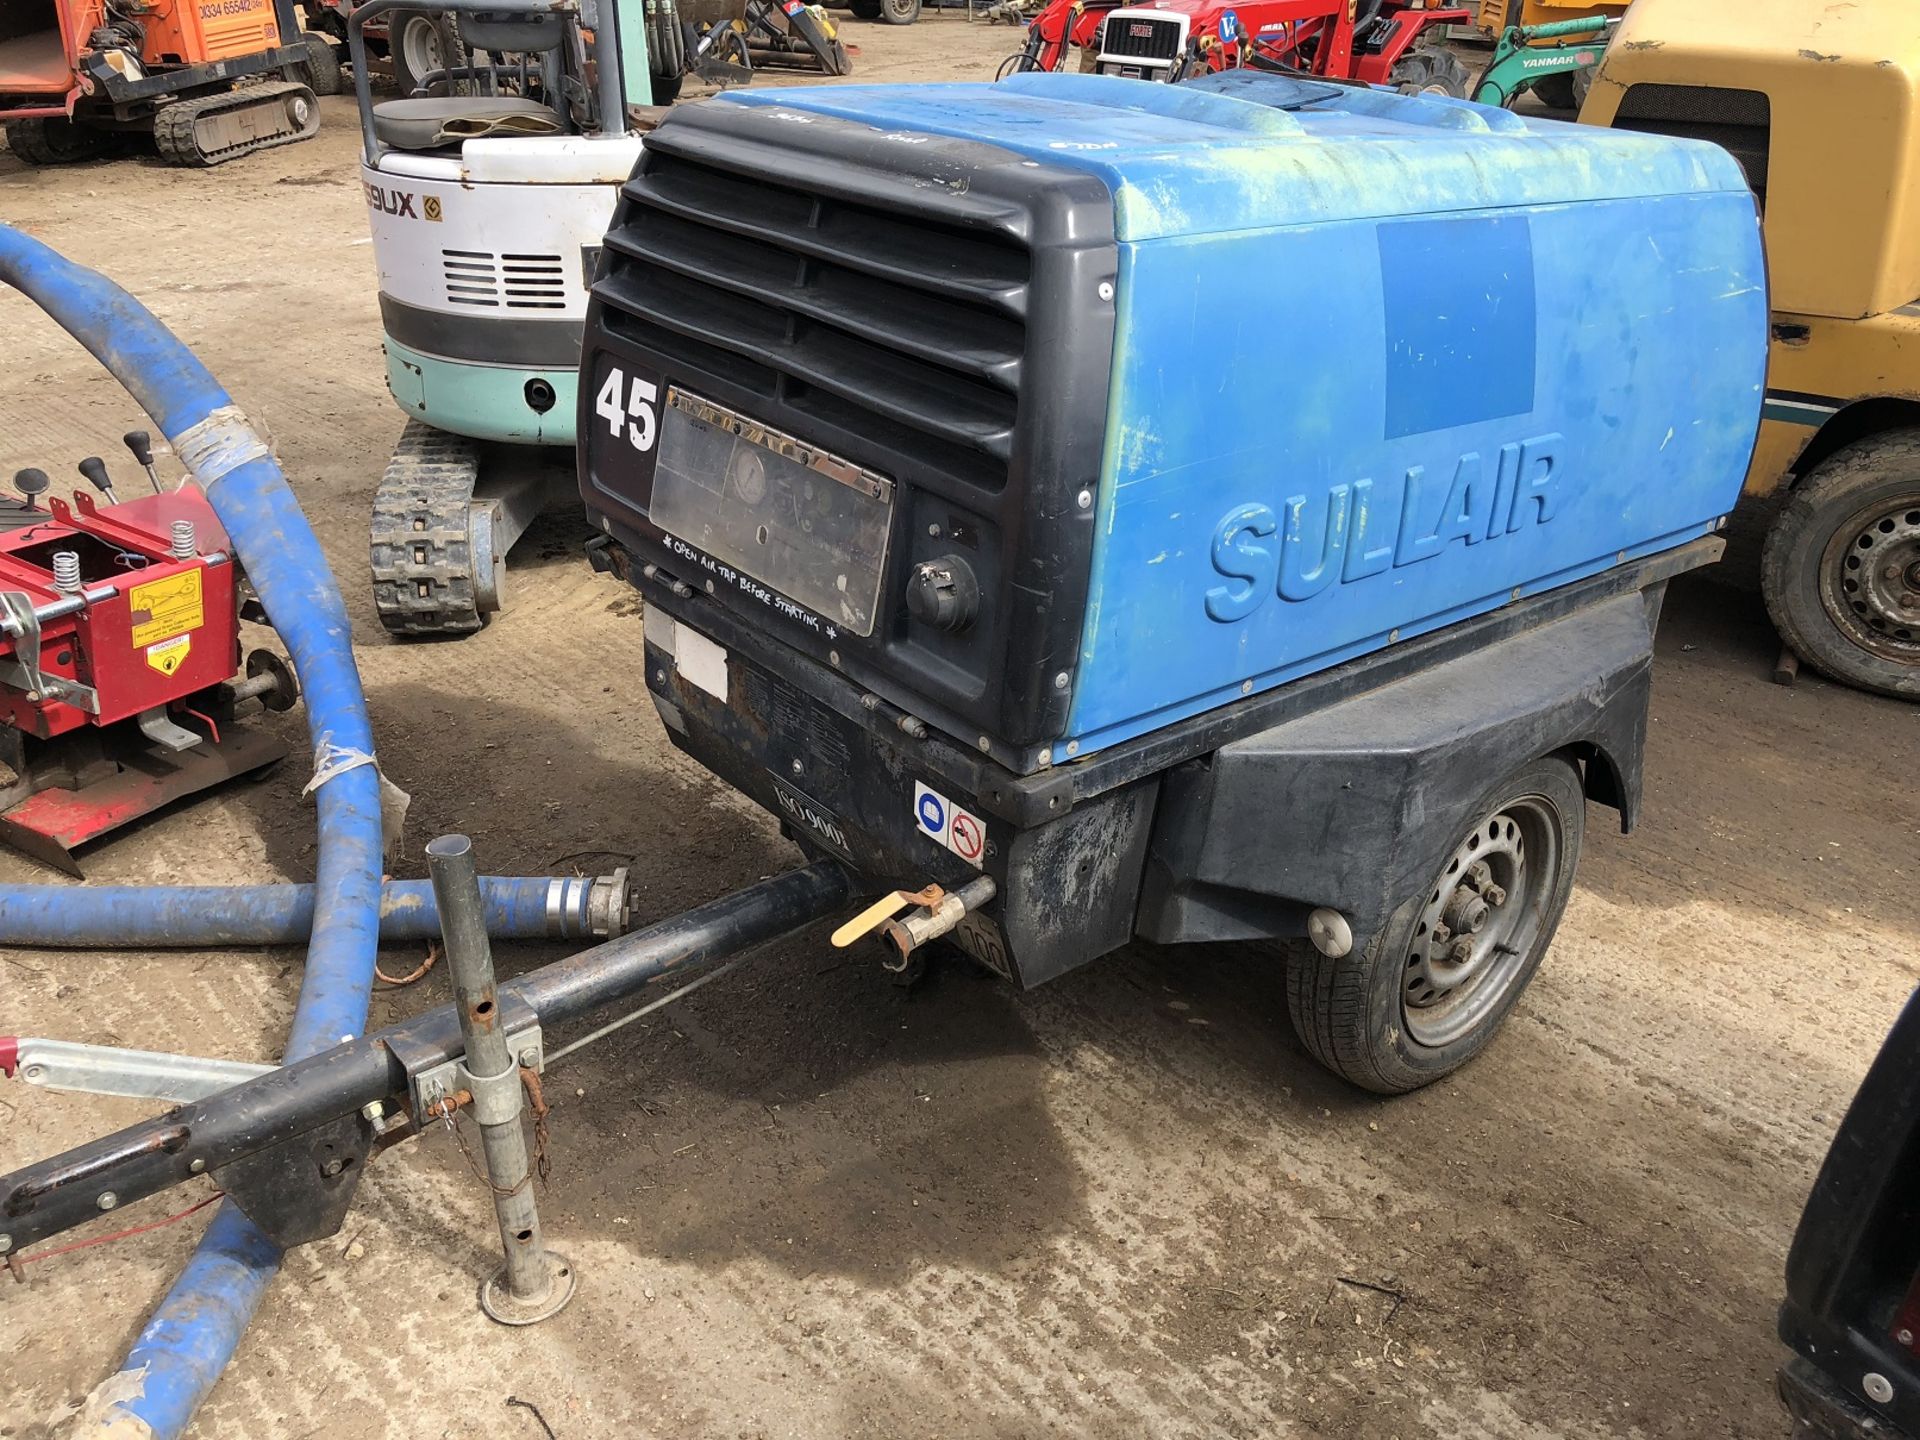 TOWABLE SINGLE AXLE SULLAIR 45 COMPRESSOR, UP TO 4 AVAILABLE *PLUS VAT* - Image 2 of 5